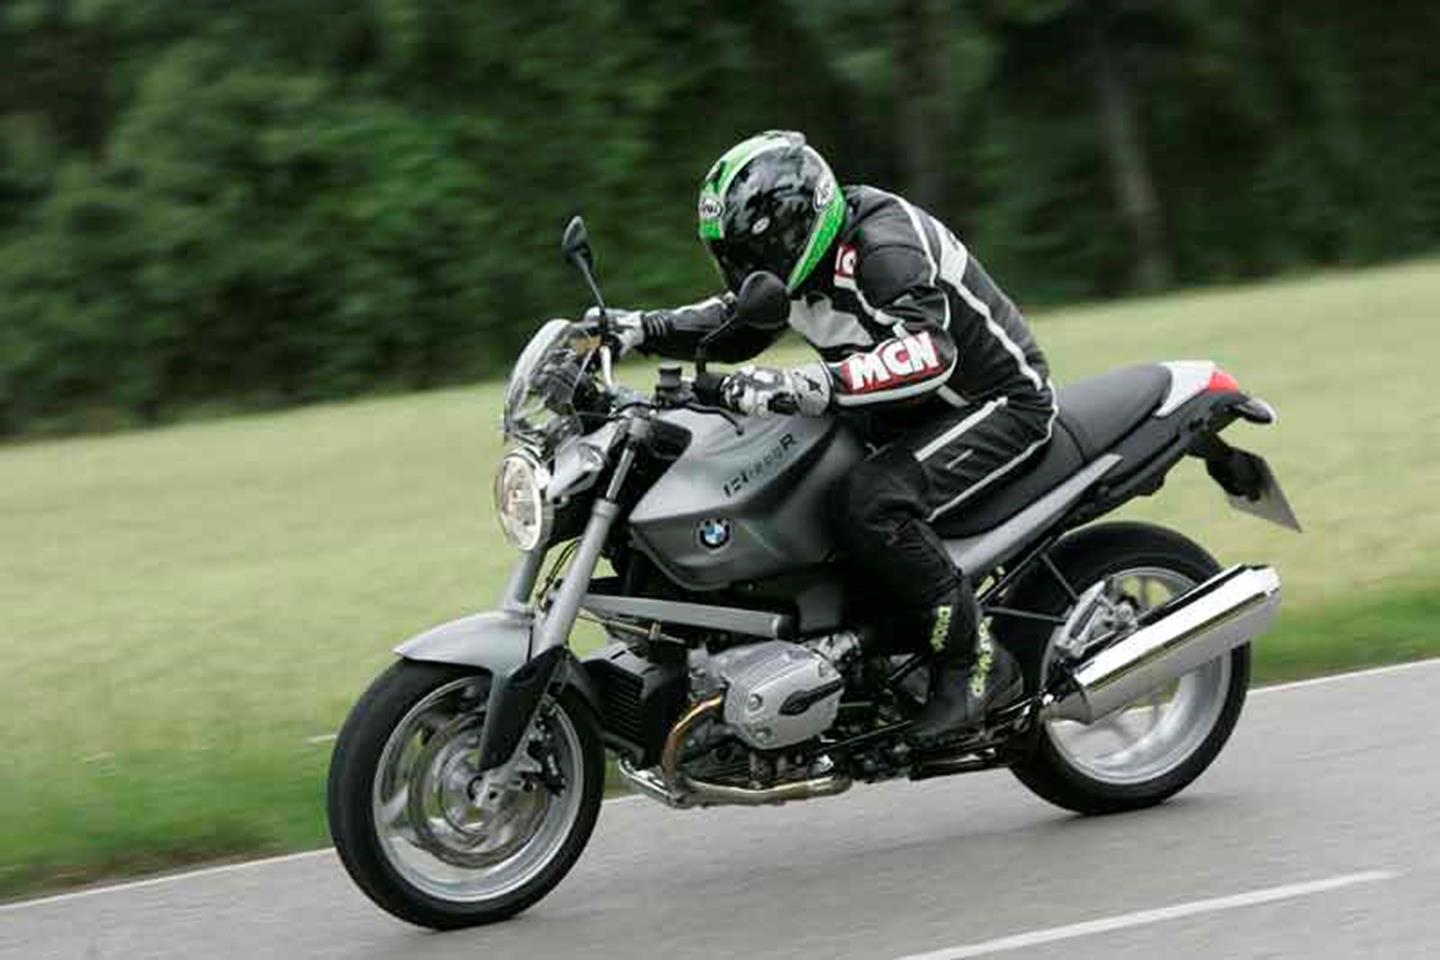 BMW R1200R (2006-2014) Review | Owner & Expert Ratings